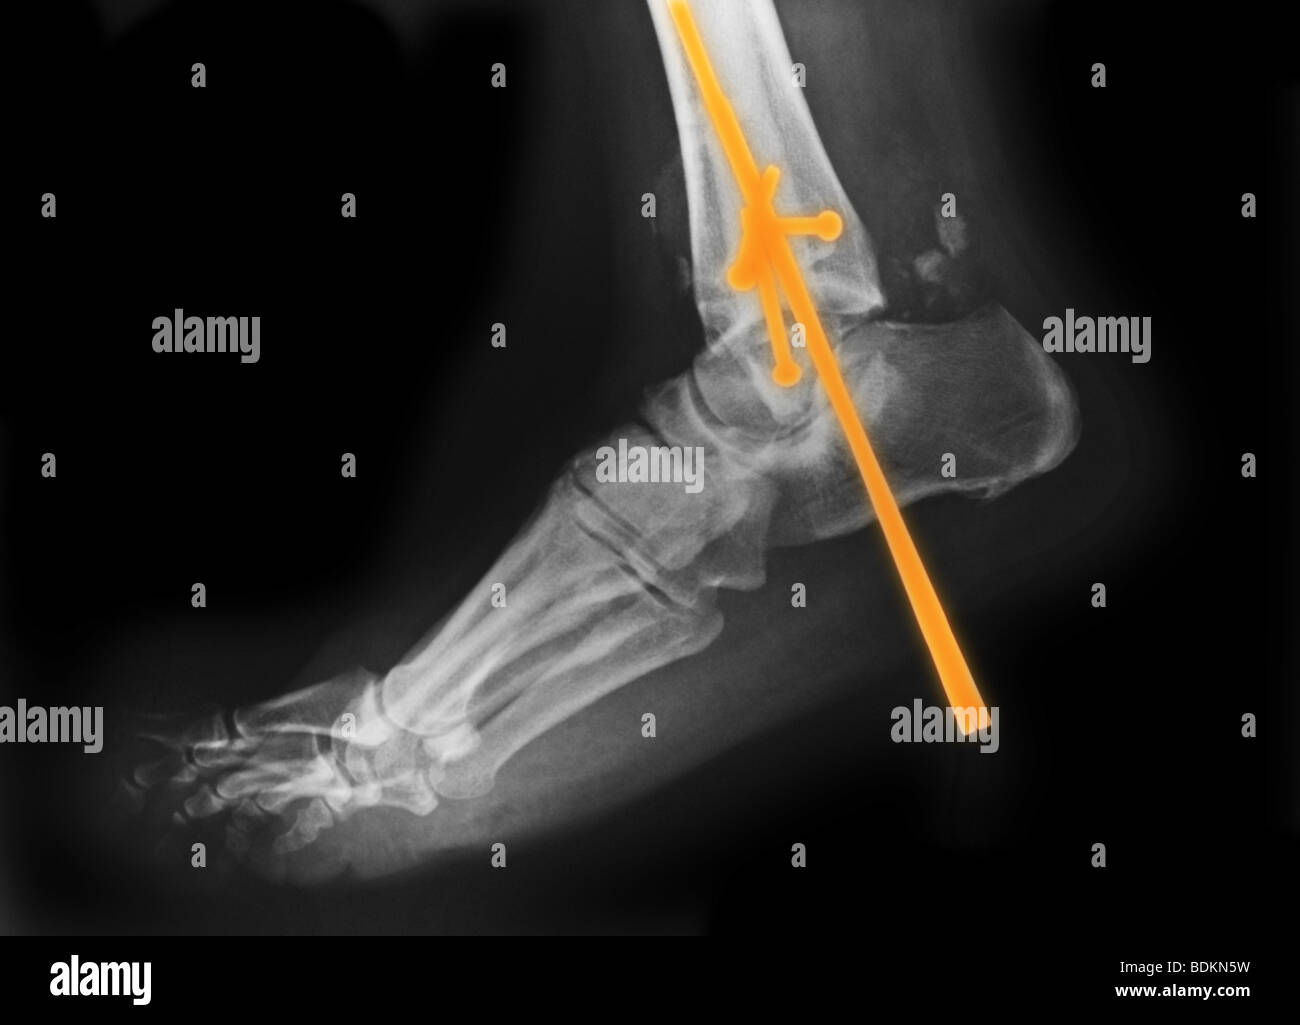 x-ray of the foot of an 61 year old woman with a comminuted fracture of the ankle that was surgically repaired Stock Photo